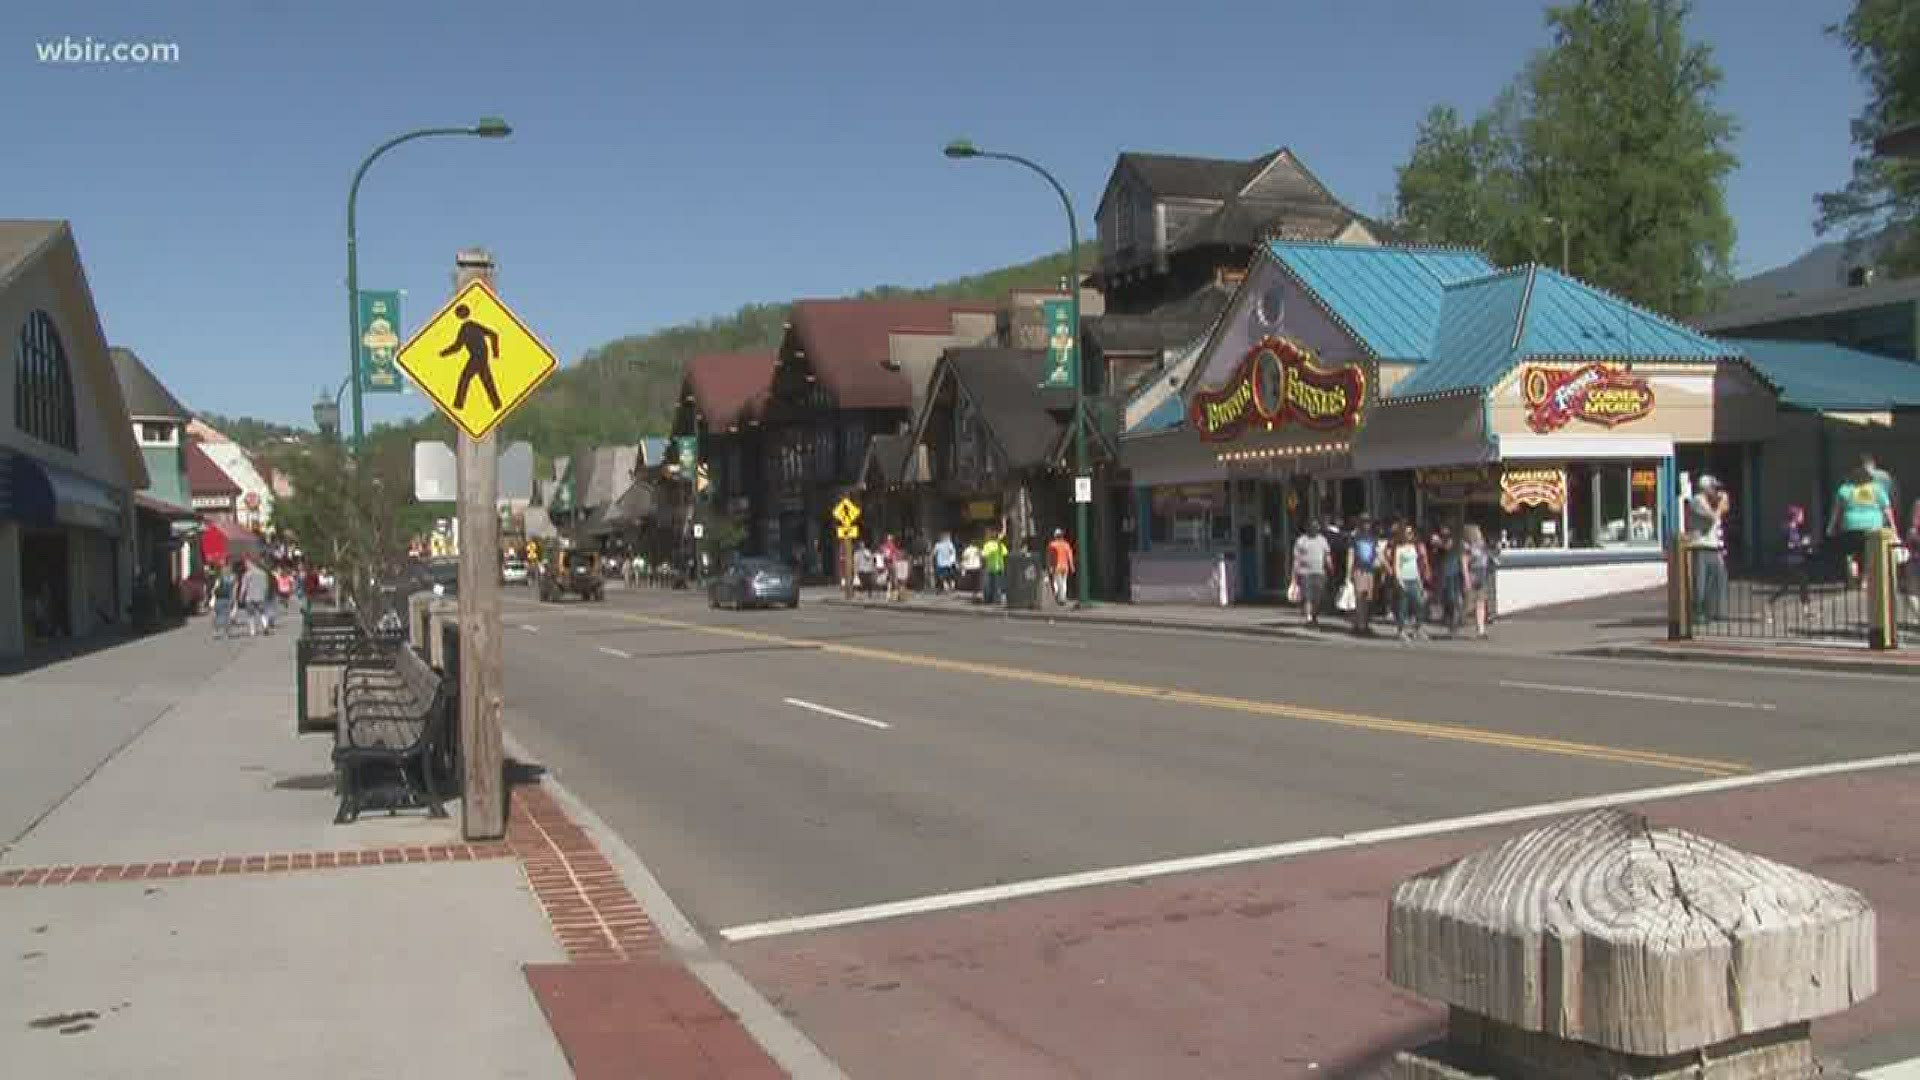 The Gatlinburg City Commission voted not to have sidewalk extensions for the coming weekend.